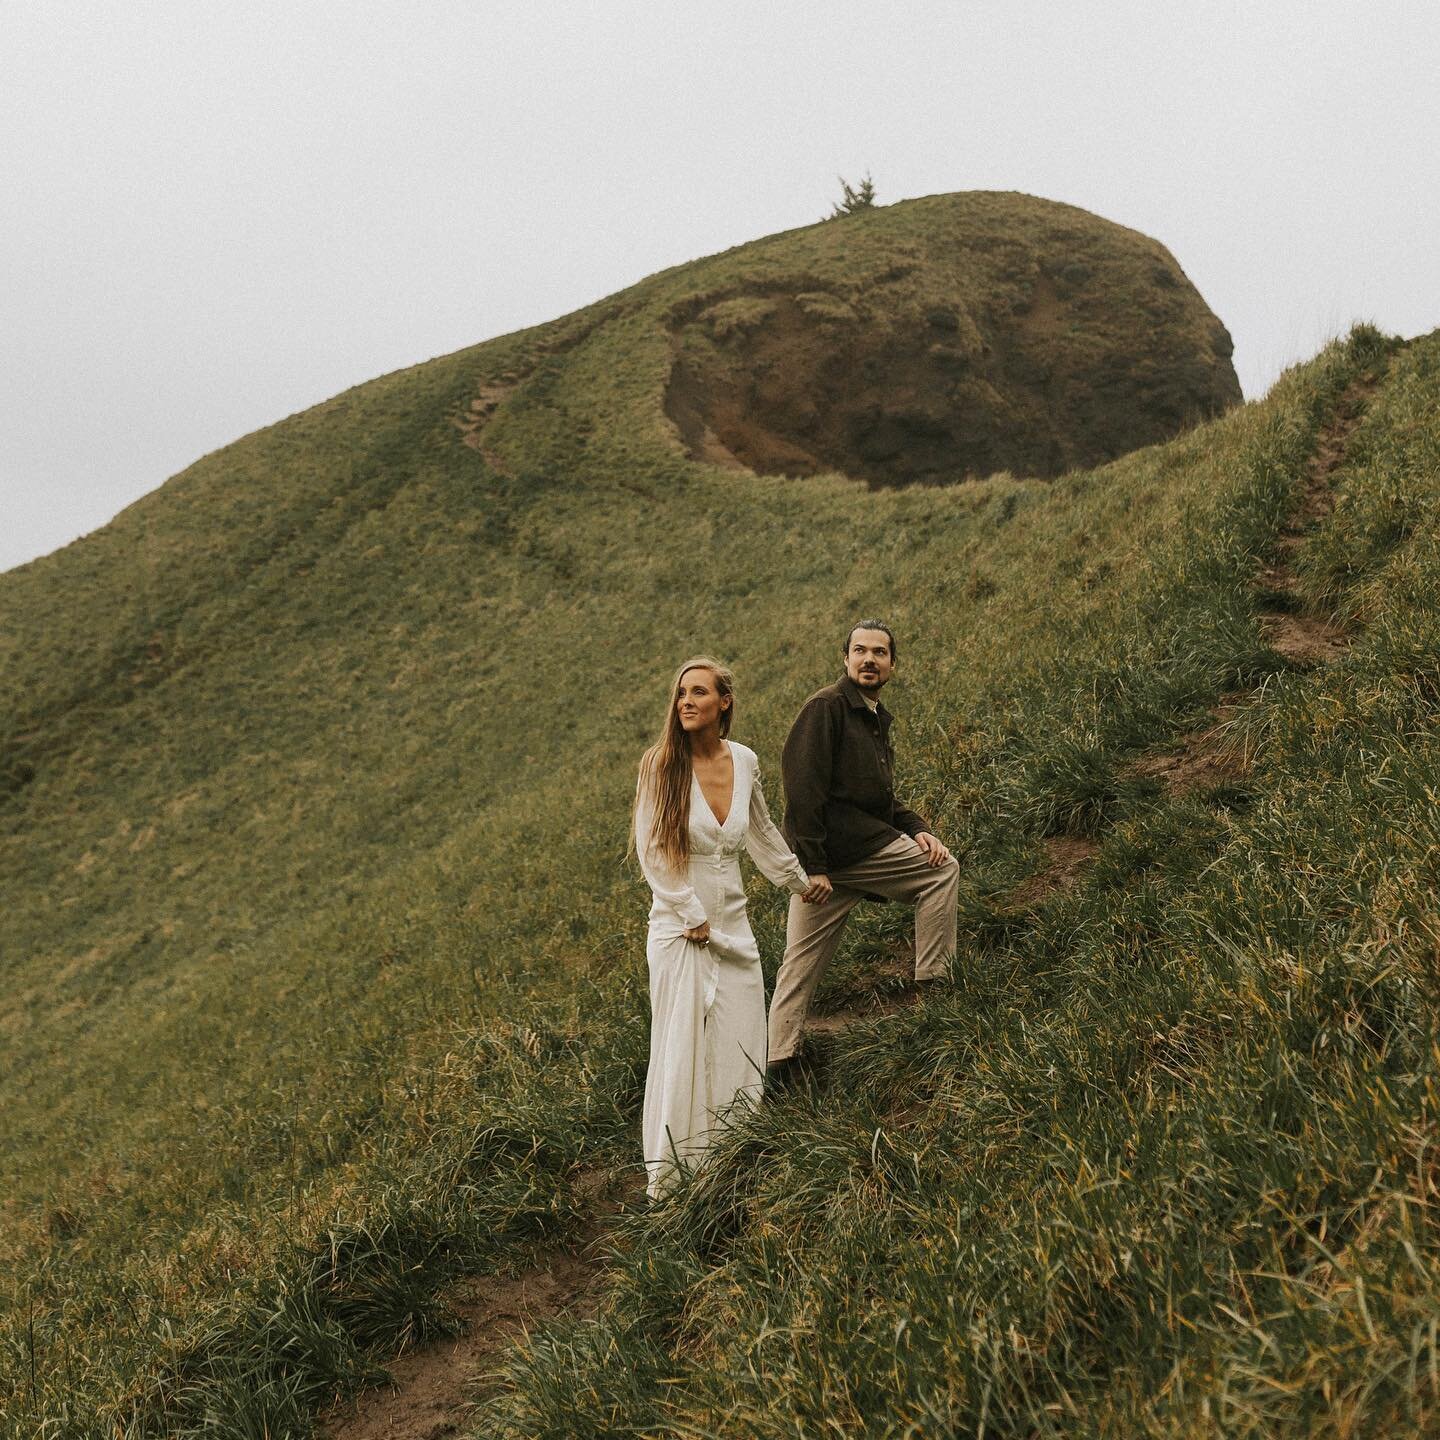 Two years of your love &mdash; a force of nature that has forever shaped the contours of my heart. I am the luckiest woman on Earth 🌊🌎🌬 Happy anniversary, sweetie @calvin__pia 

Imagery by the exquisite @anniesarahphotography